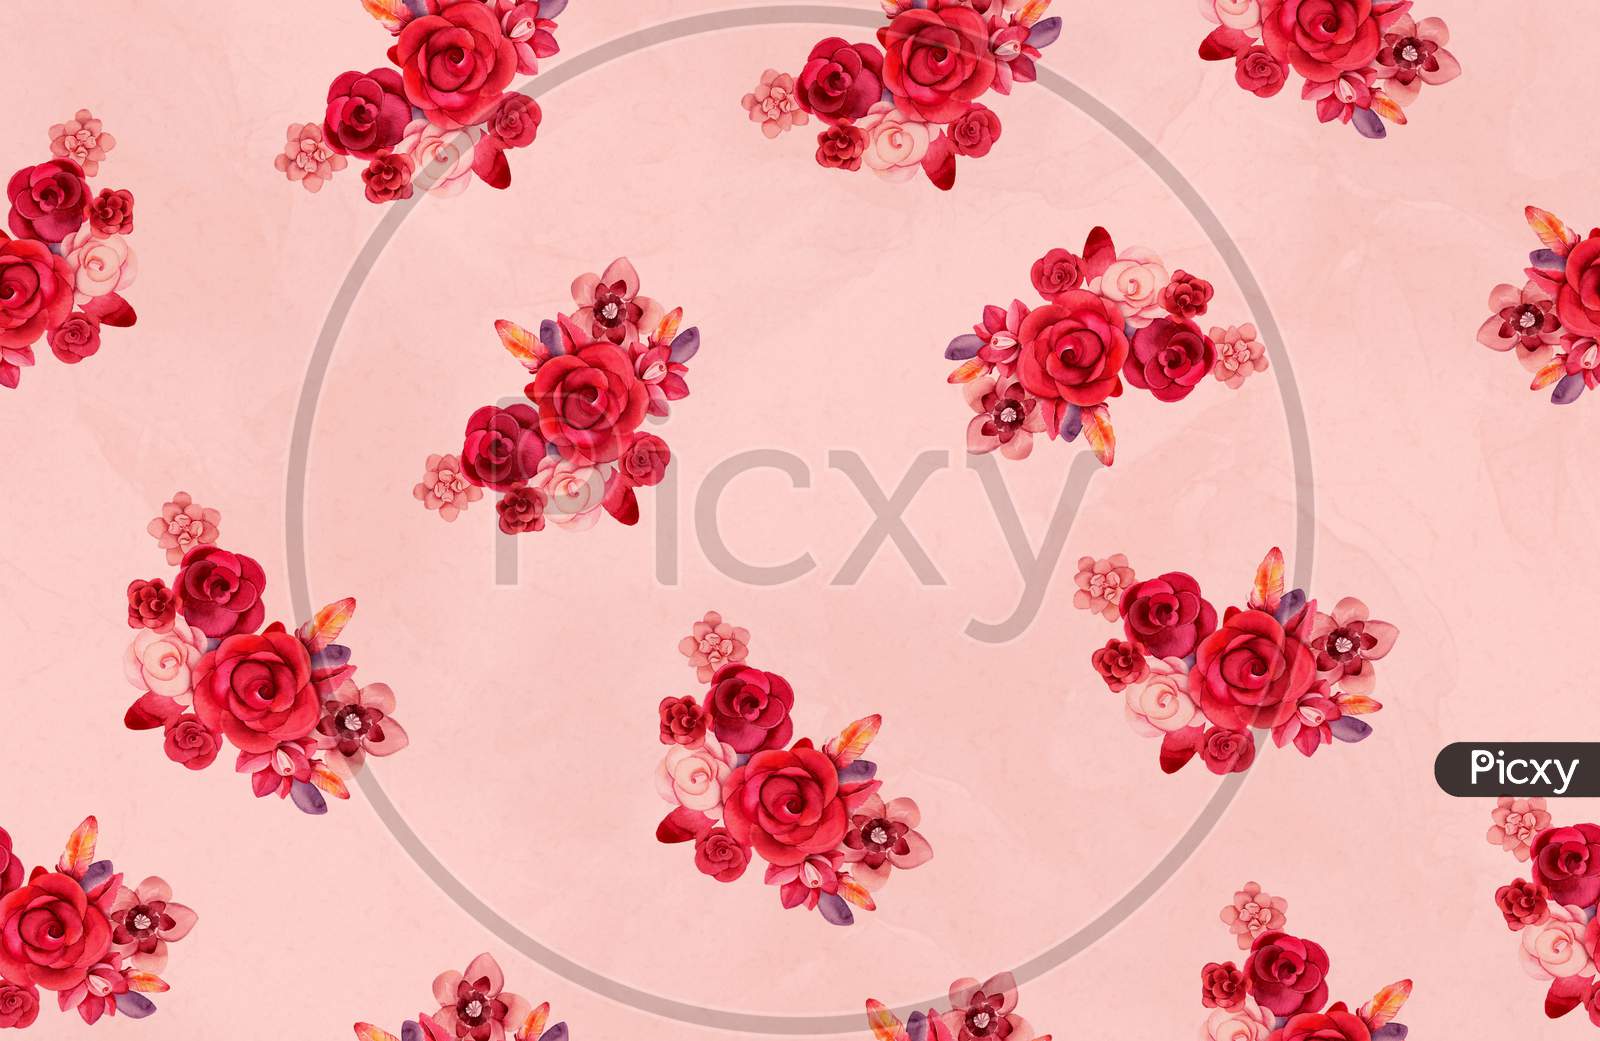 Seamless floral pattern with rose flowers, watercolor. Can be used for T-shirt print, fashion print design, kids wear, greeting and invitation card.